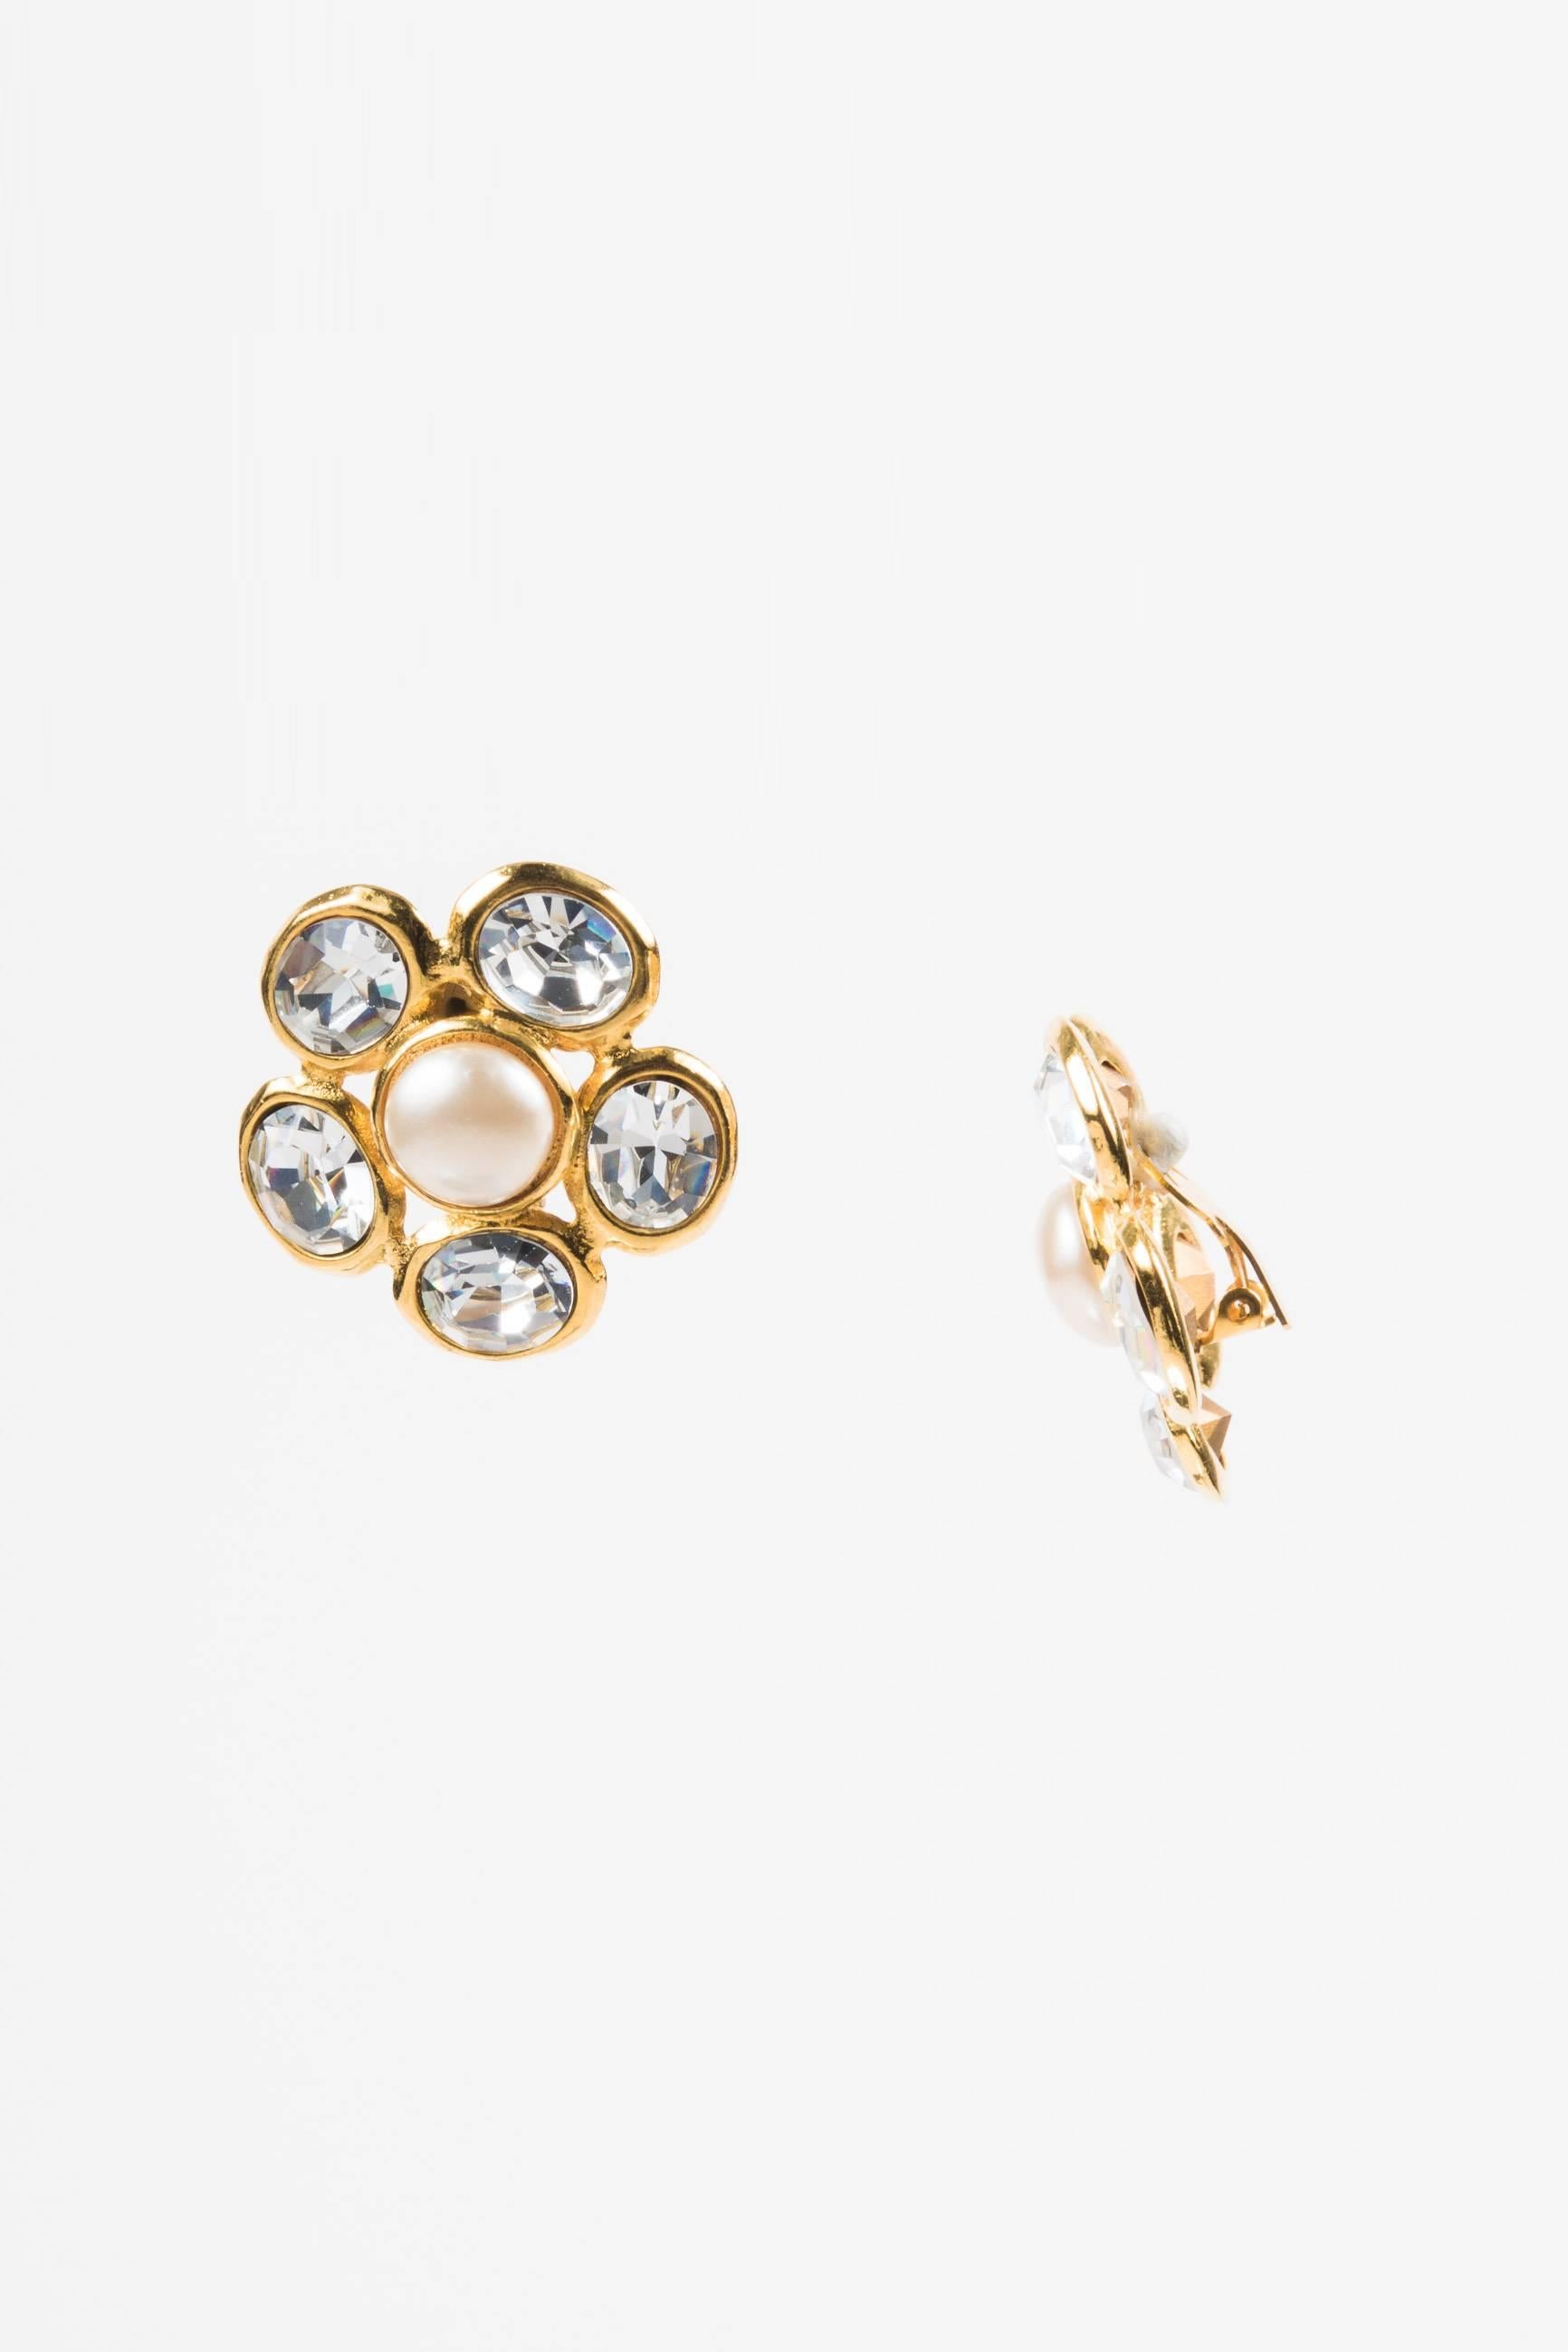 Vintage gold-tone metal cluster earrings by Chanel. Features a faux pearl center surrounded by large clear crystals. Clip ons. Season 29. Circa 1992.